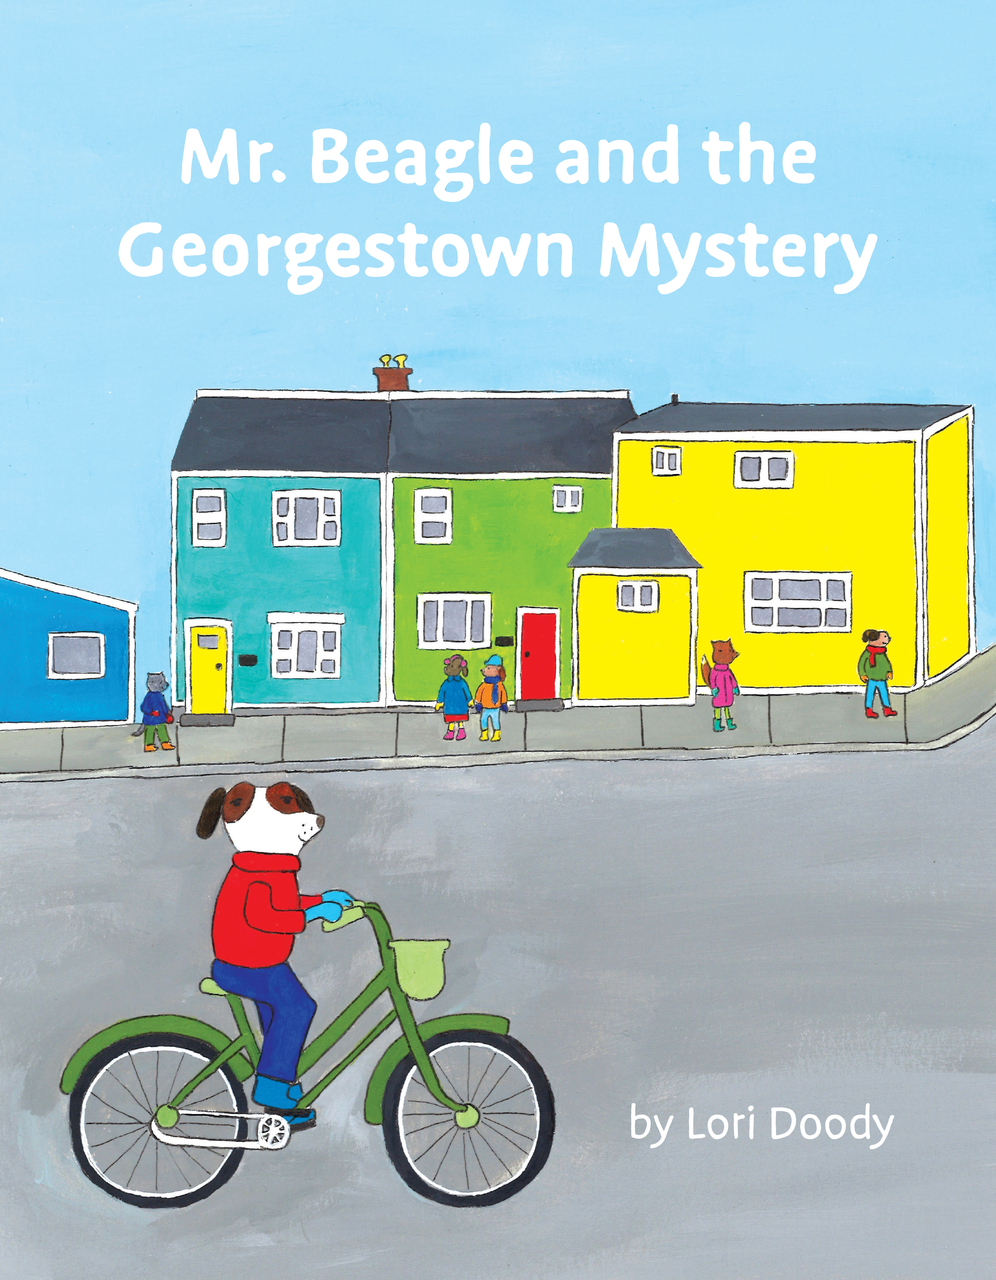 Mr. Beagle and the Georgestown Mystery